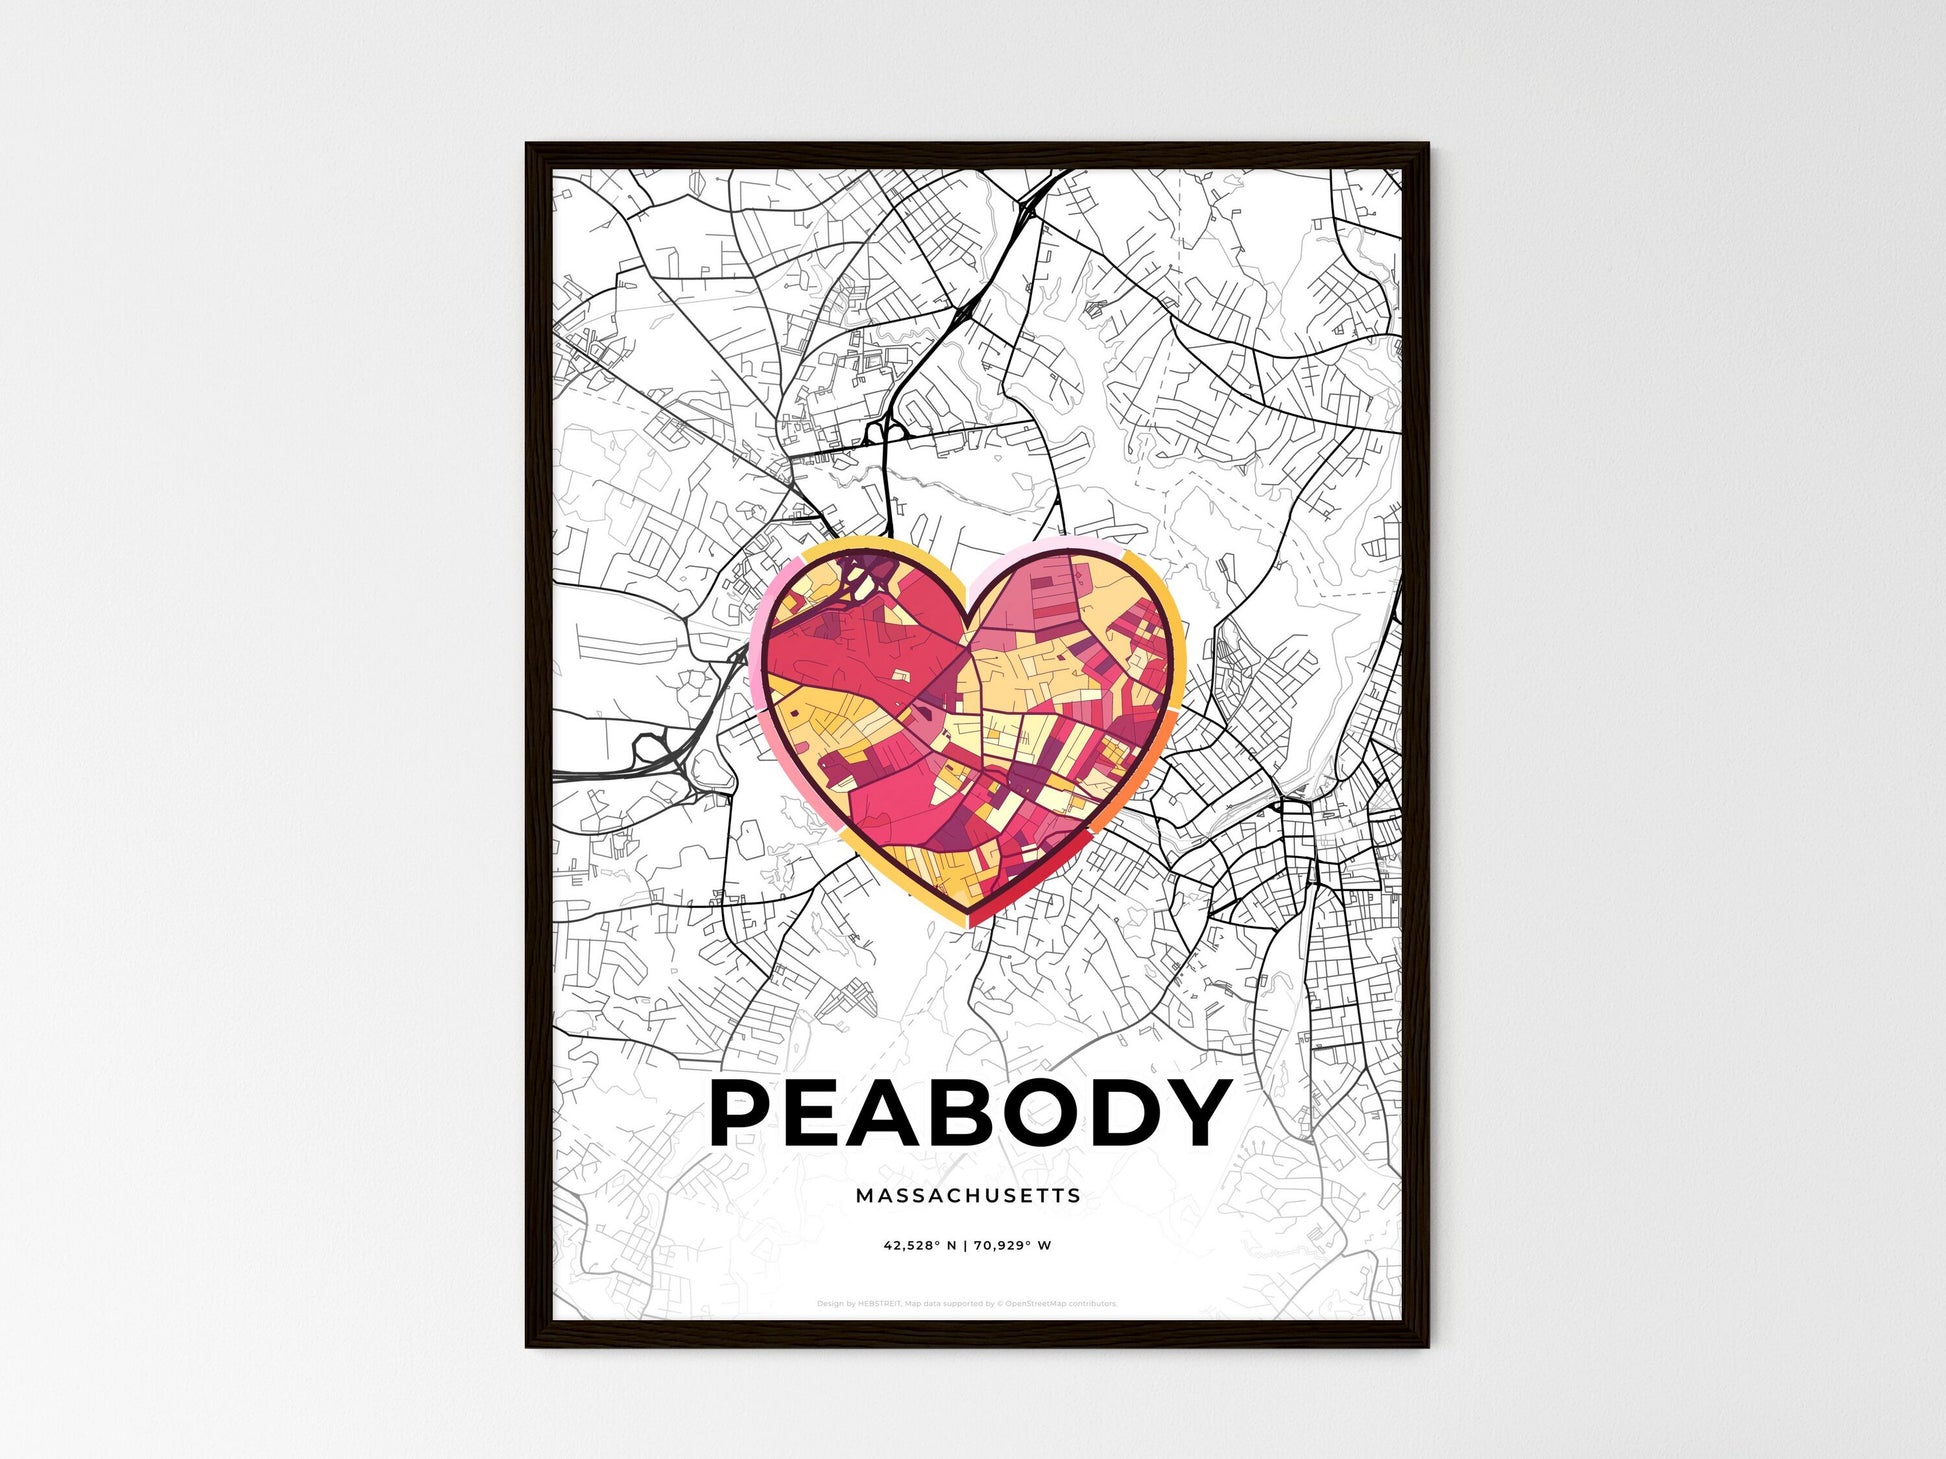 PEABODY MASSACHUSETTS minimal art map with a colorful icon. Style 2